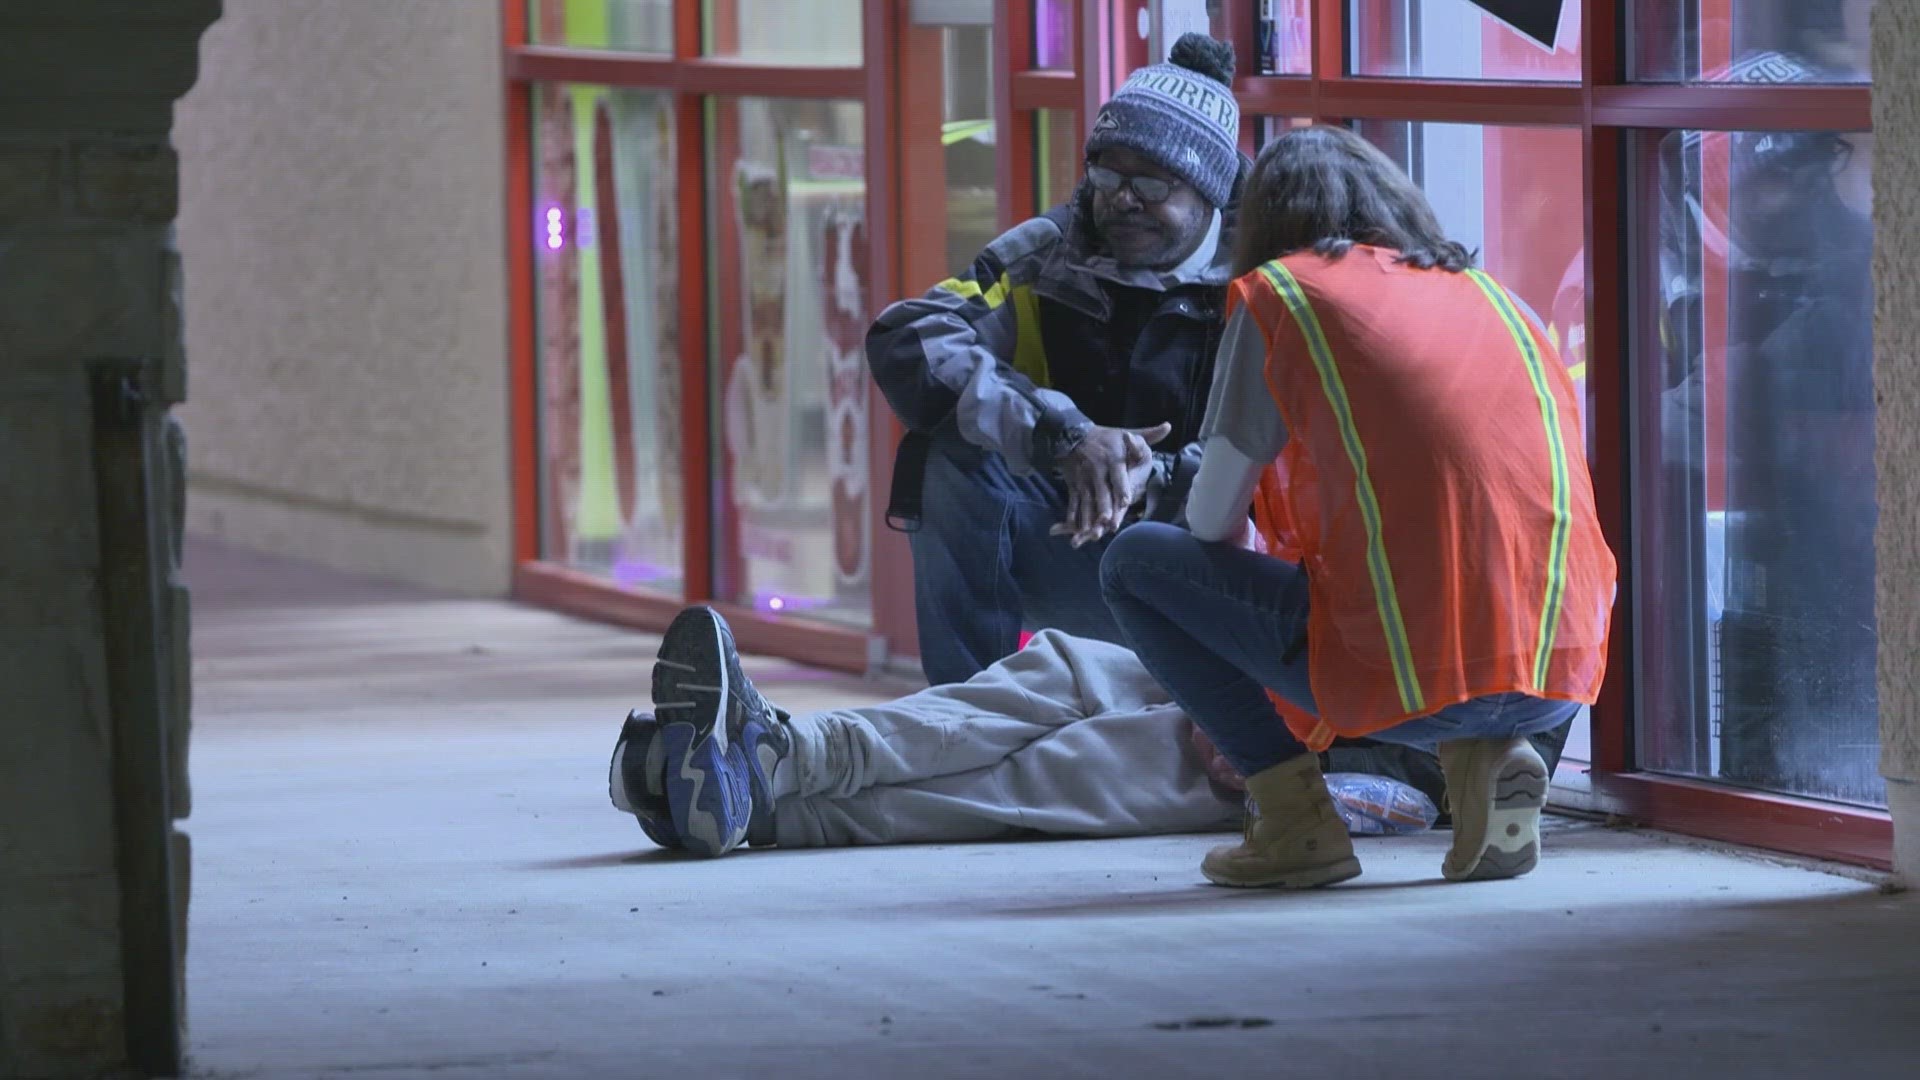 The count is to give a snapshot of what homelessness looks like in the community.